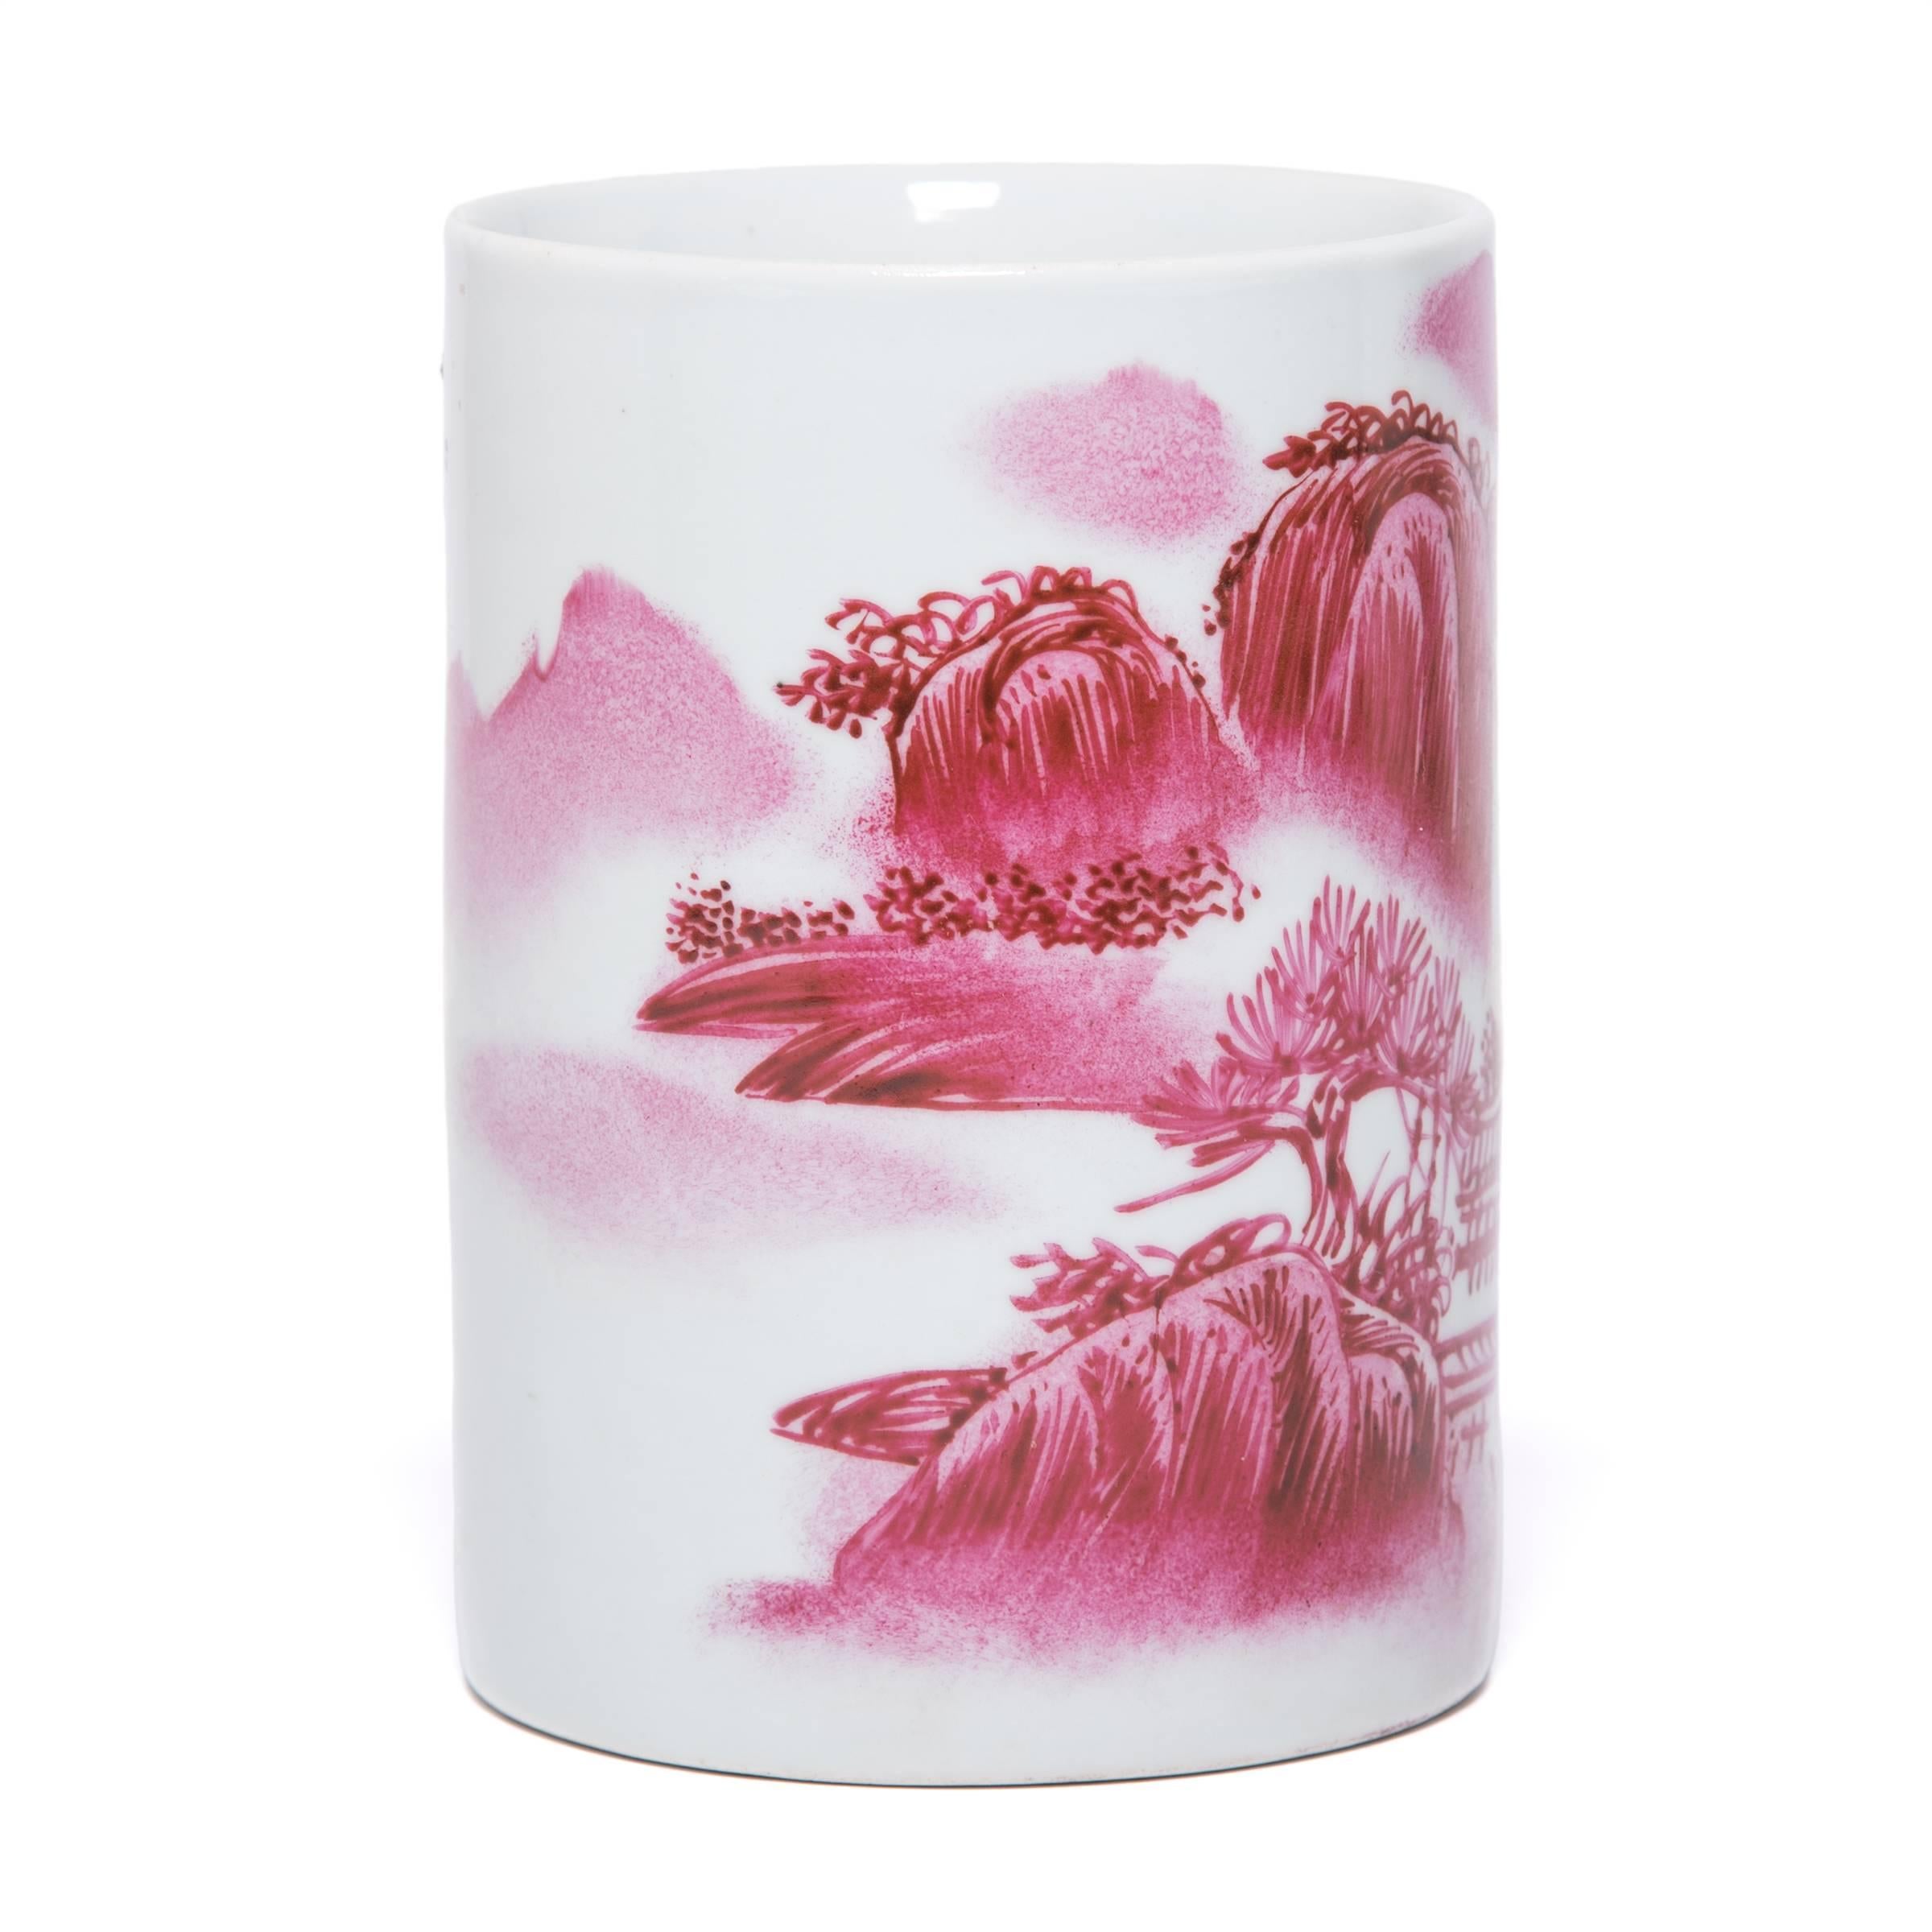 A twist on traditional blue-and-white ceramics, rich shades of red decorate this ceramic brush pot with a landscape rendered in the traditional shan shui painting style. Characterized by soft, feathery brushstrokes, the style advocates balance,